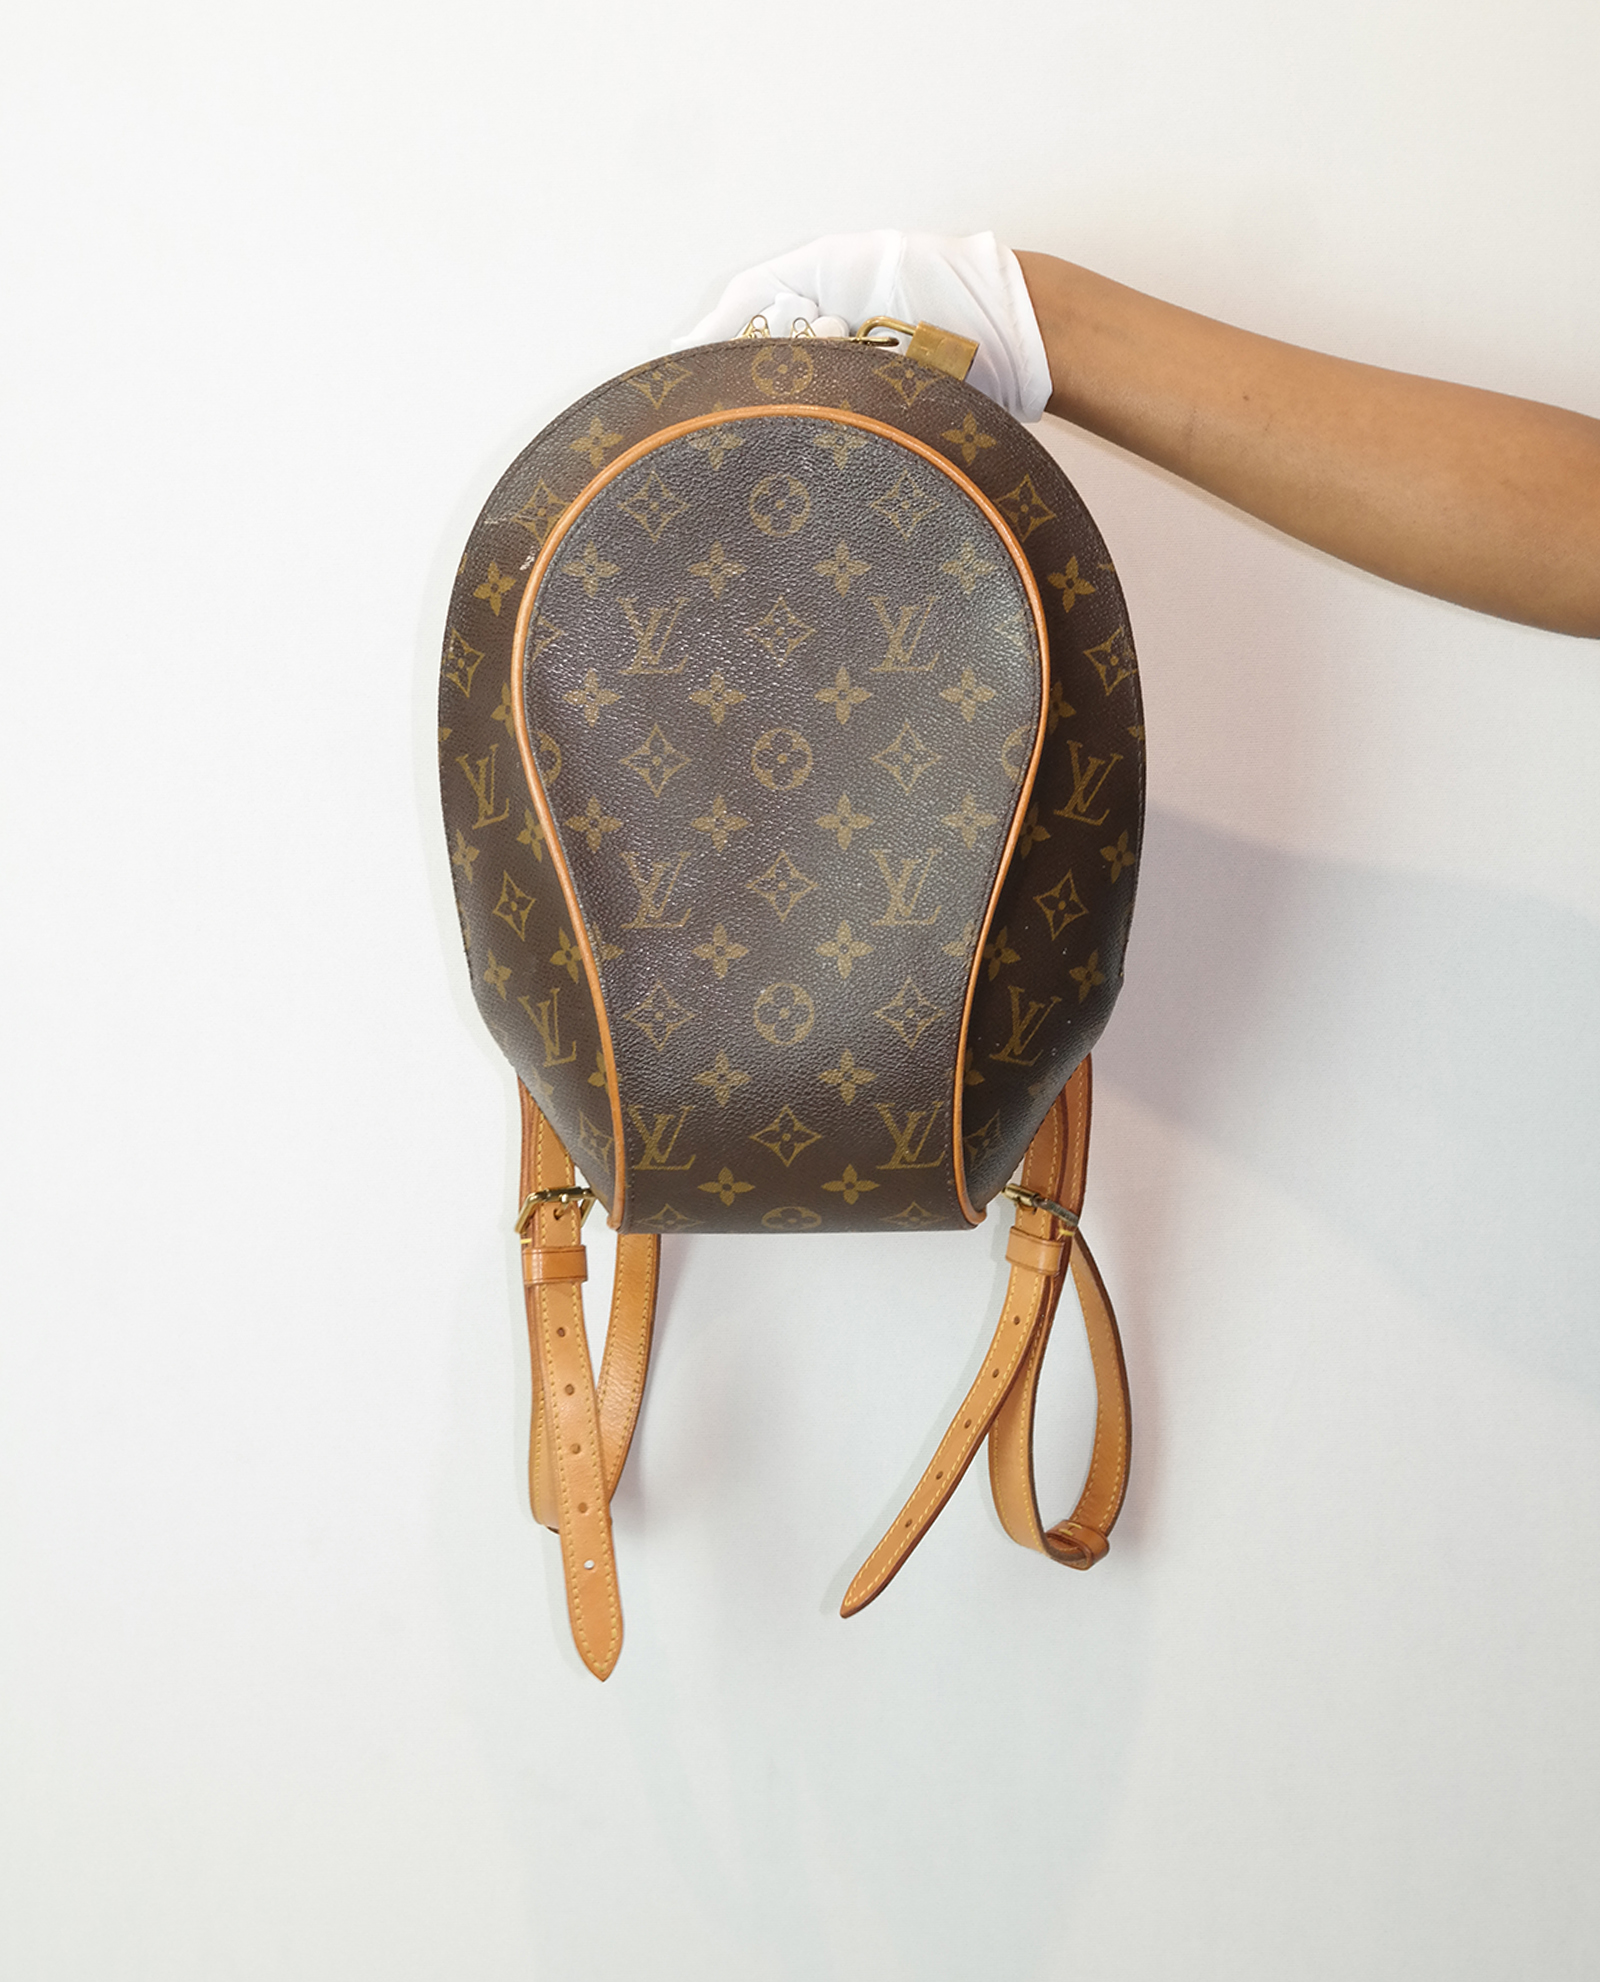 Louis Vuitton Ellipse Backpack Review - Collecting Louis Vuitton - Review  13 